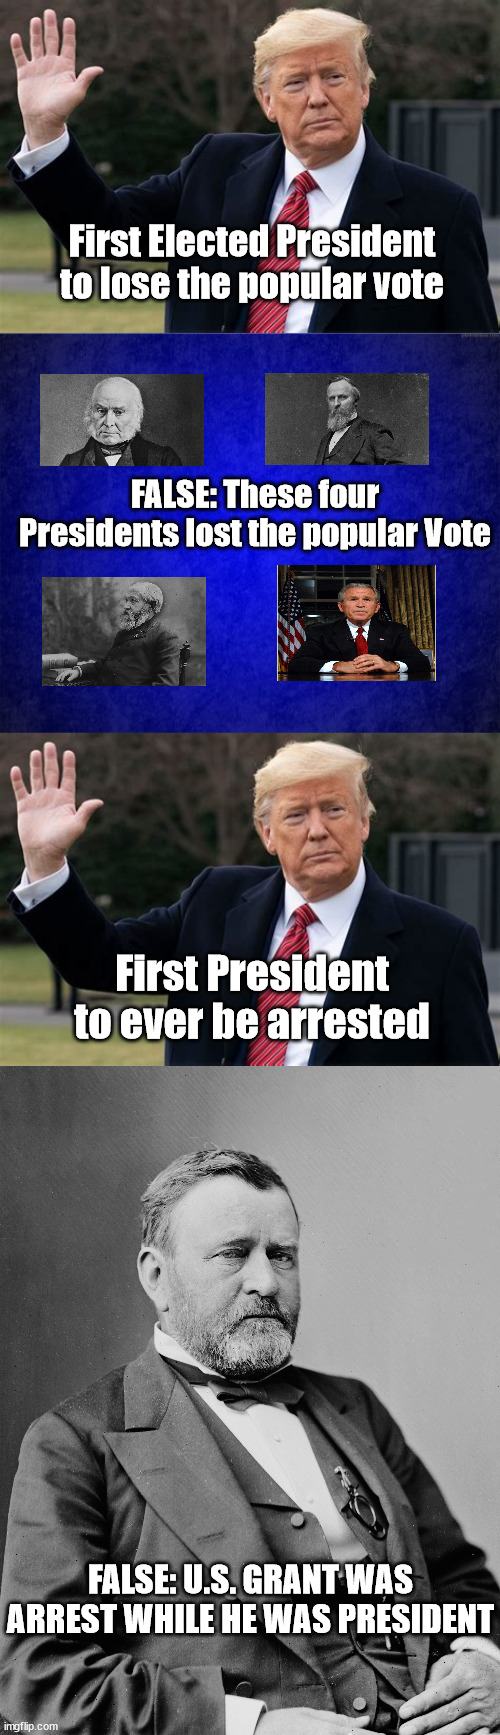 Small Untruths When Presented as Fact are Still Lies | First Elected President to lose the popular vote; FALSE: These four Presidents lost the popular Vote; First President to ever be arrested; FALSE: U.S. GRANT WAS ARREST WHILE HE WAS PRESIDENT | image tagged in trump,msm lies,democrats | made w/ Imgflip meme maker